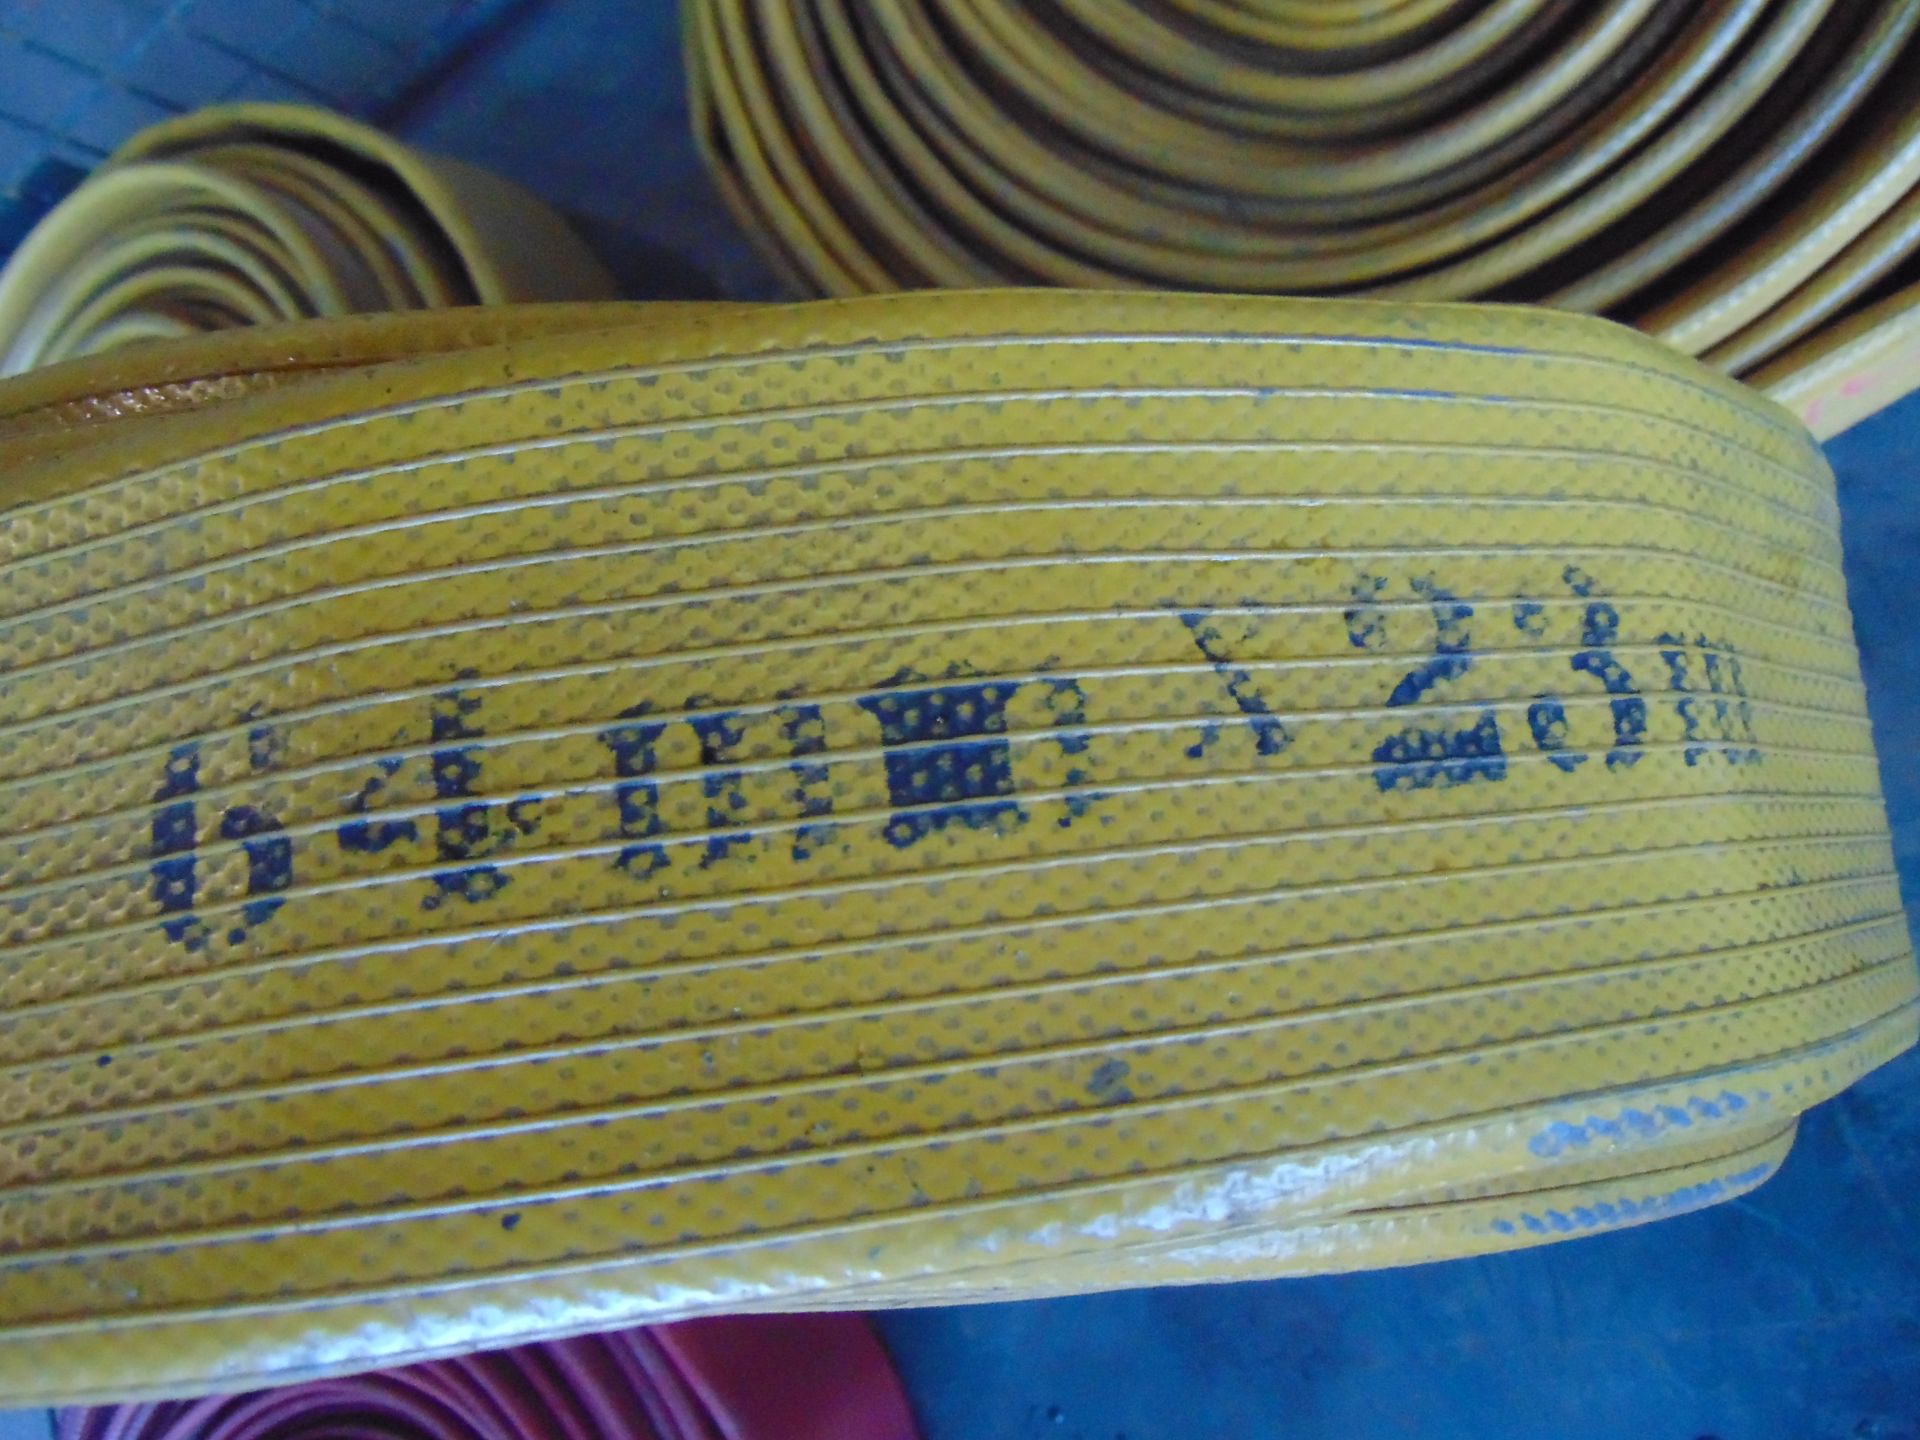 4 x Angus 64mm x 23m Layflat Fire Hoses with Couplings - Image 3 of 3